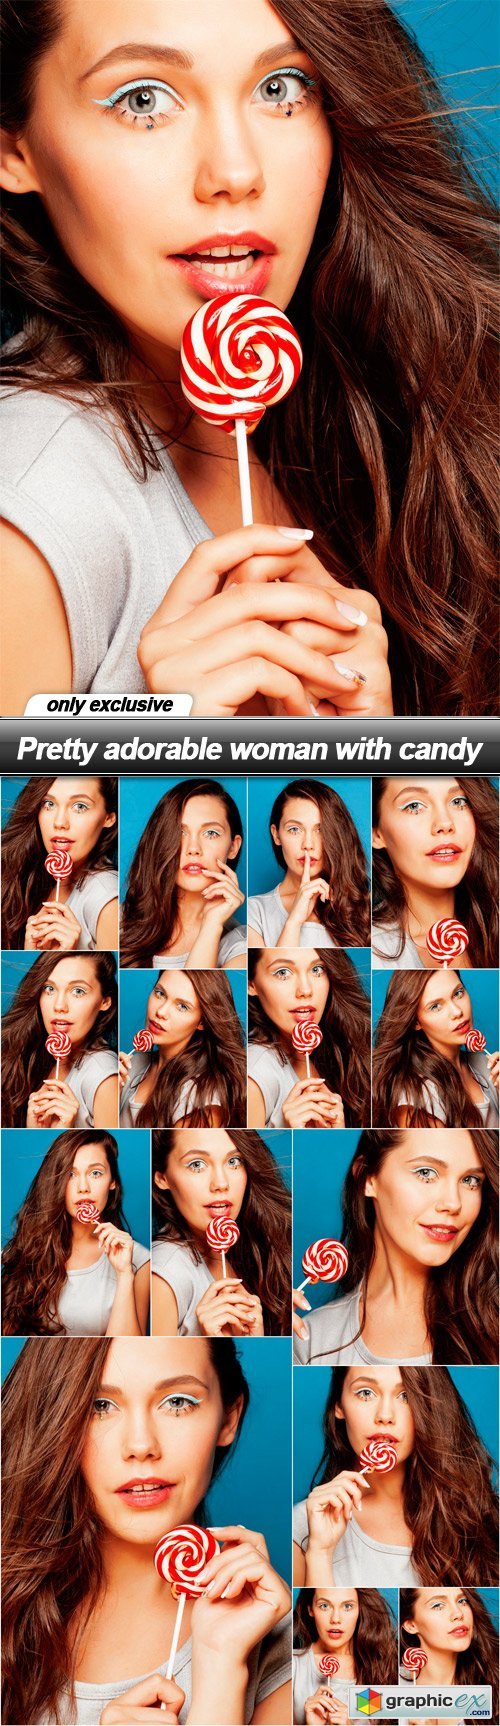 Pretty adorable woman with candy - 15 UHQ JPEG